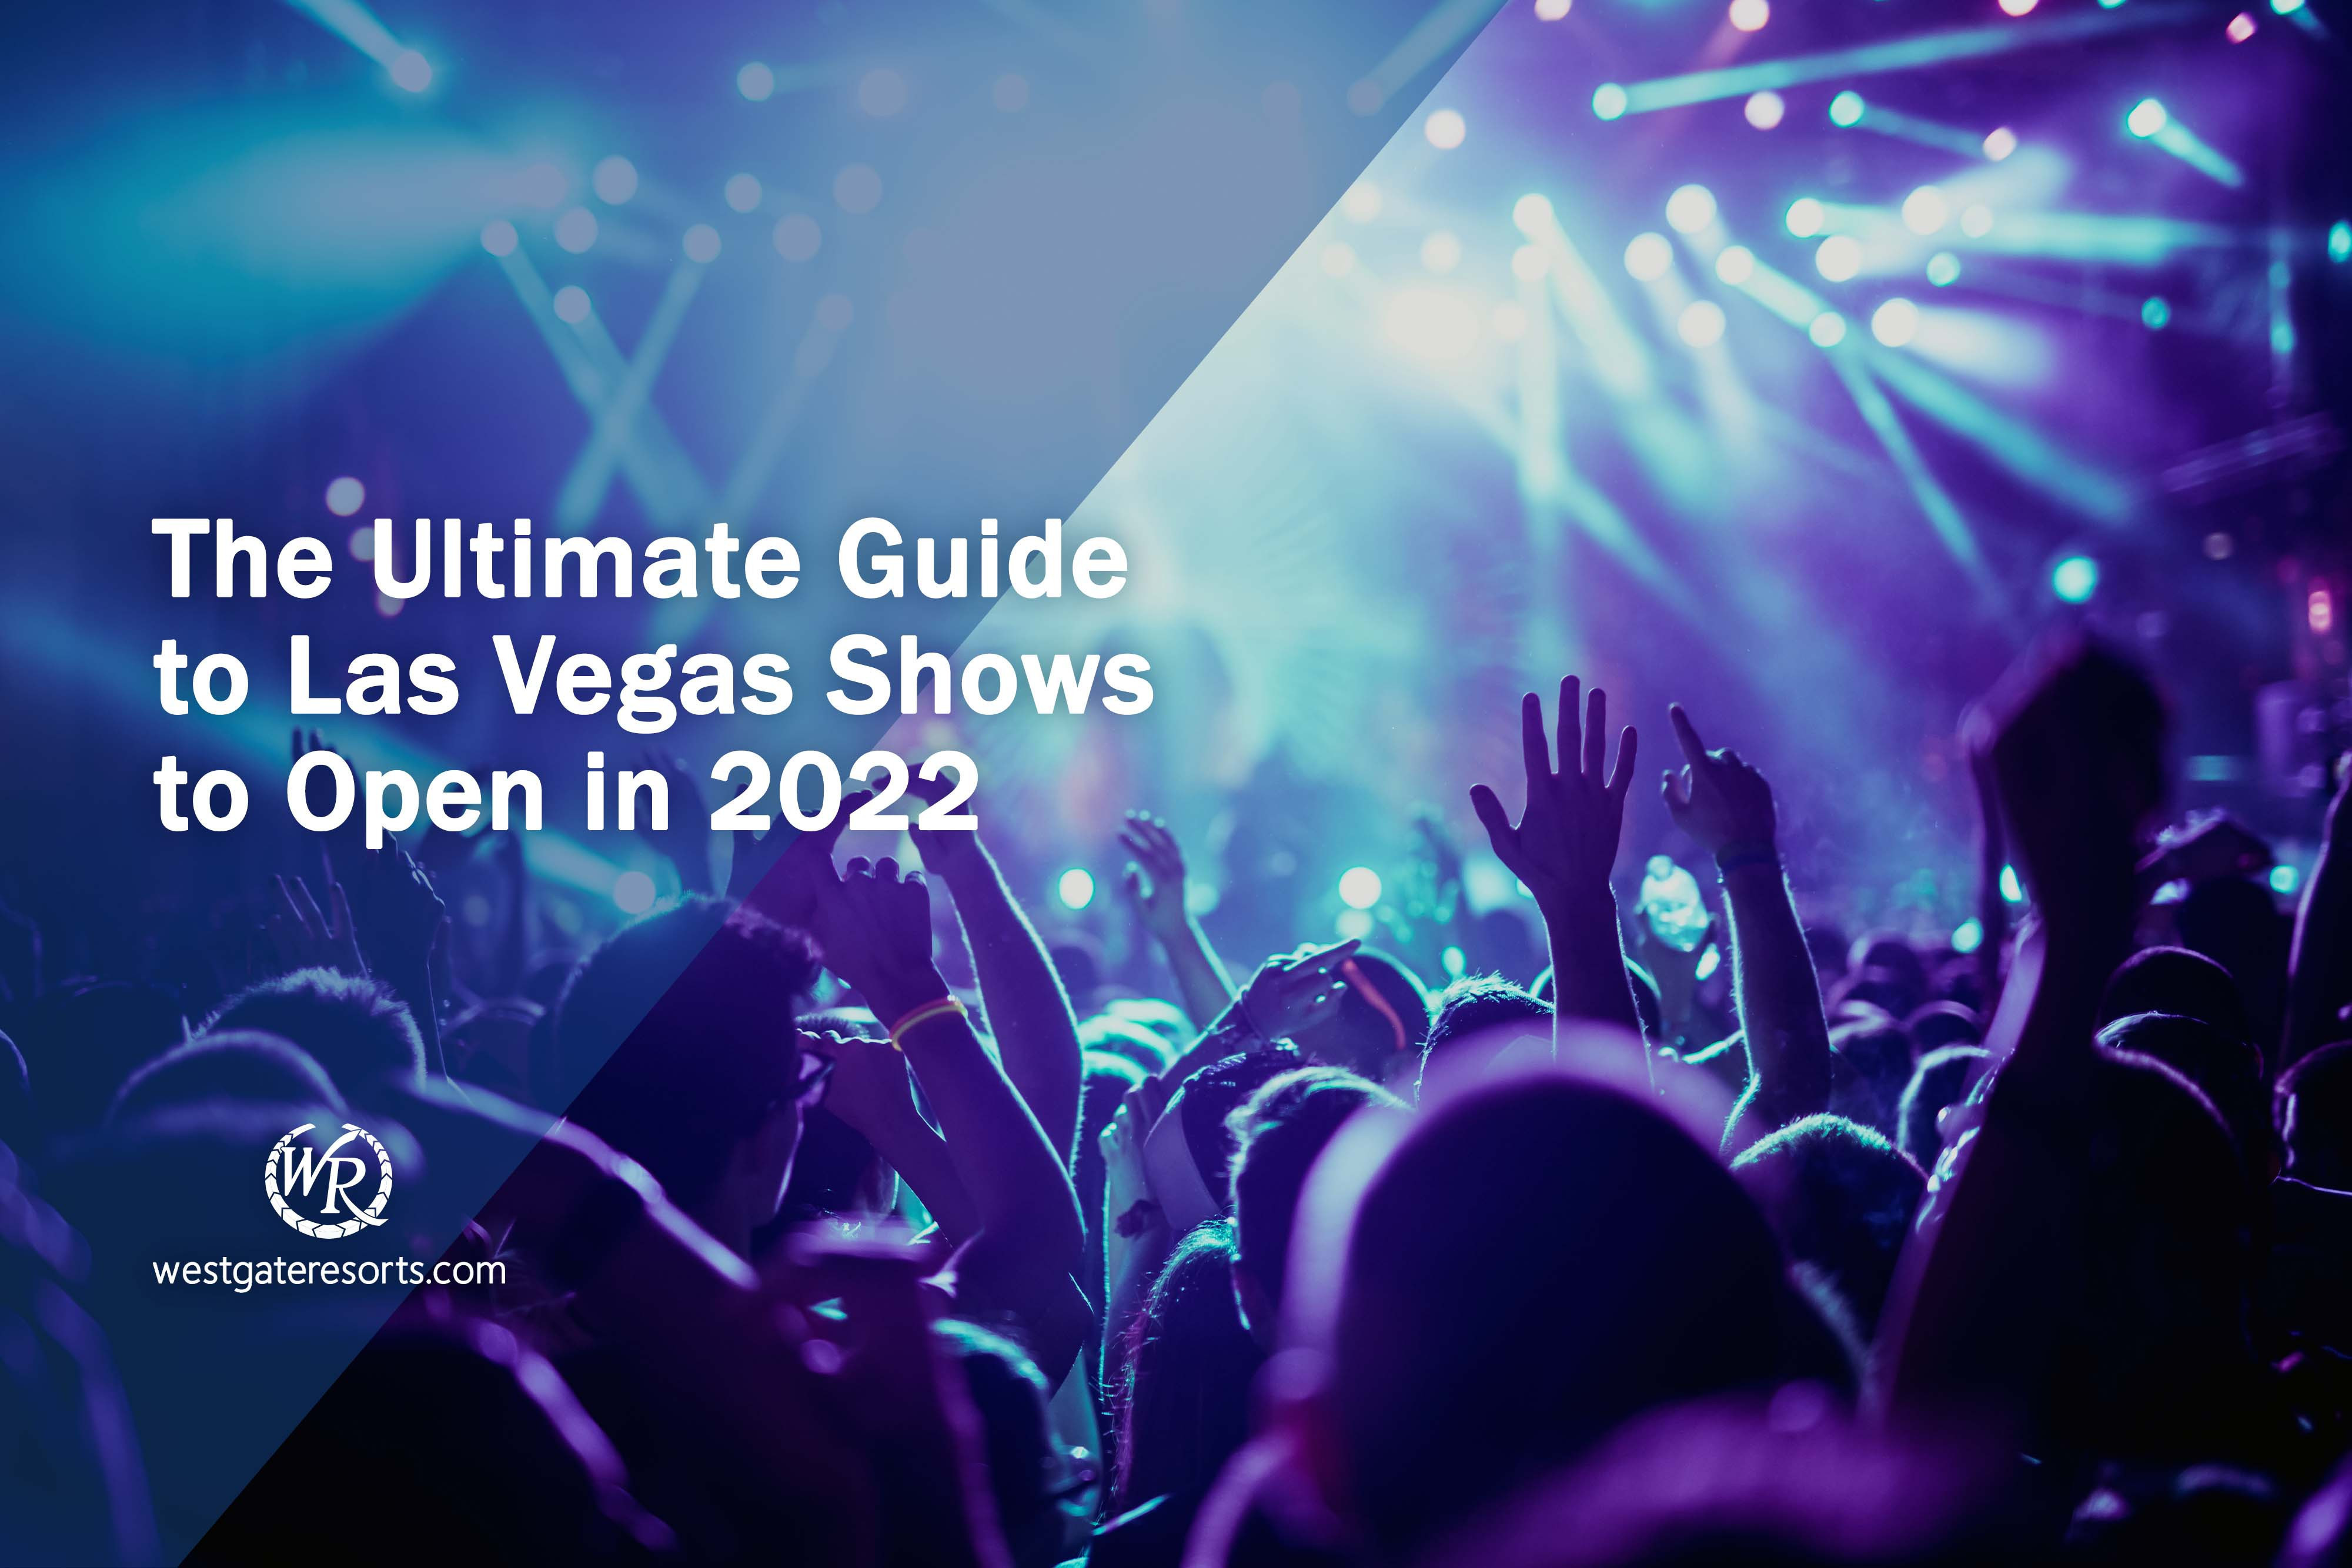 The Ultimate Guide to Las Vegas Shows to Open in 2022